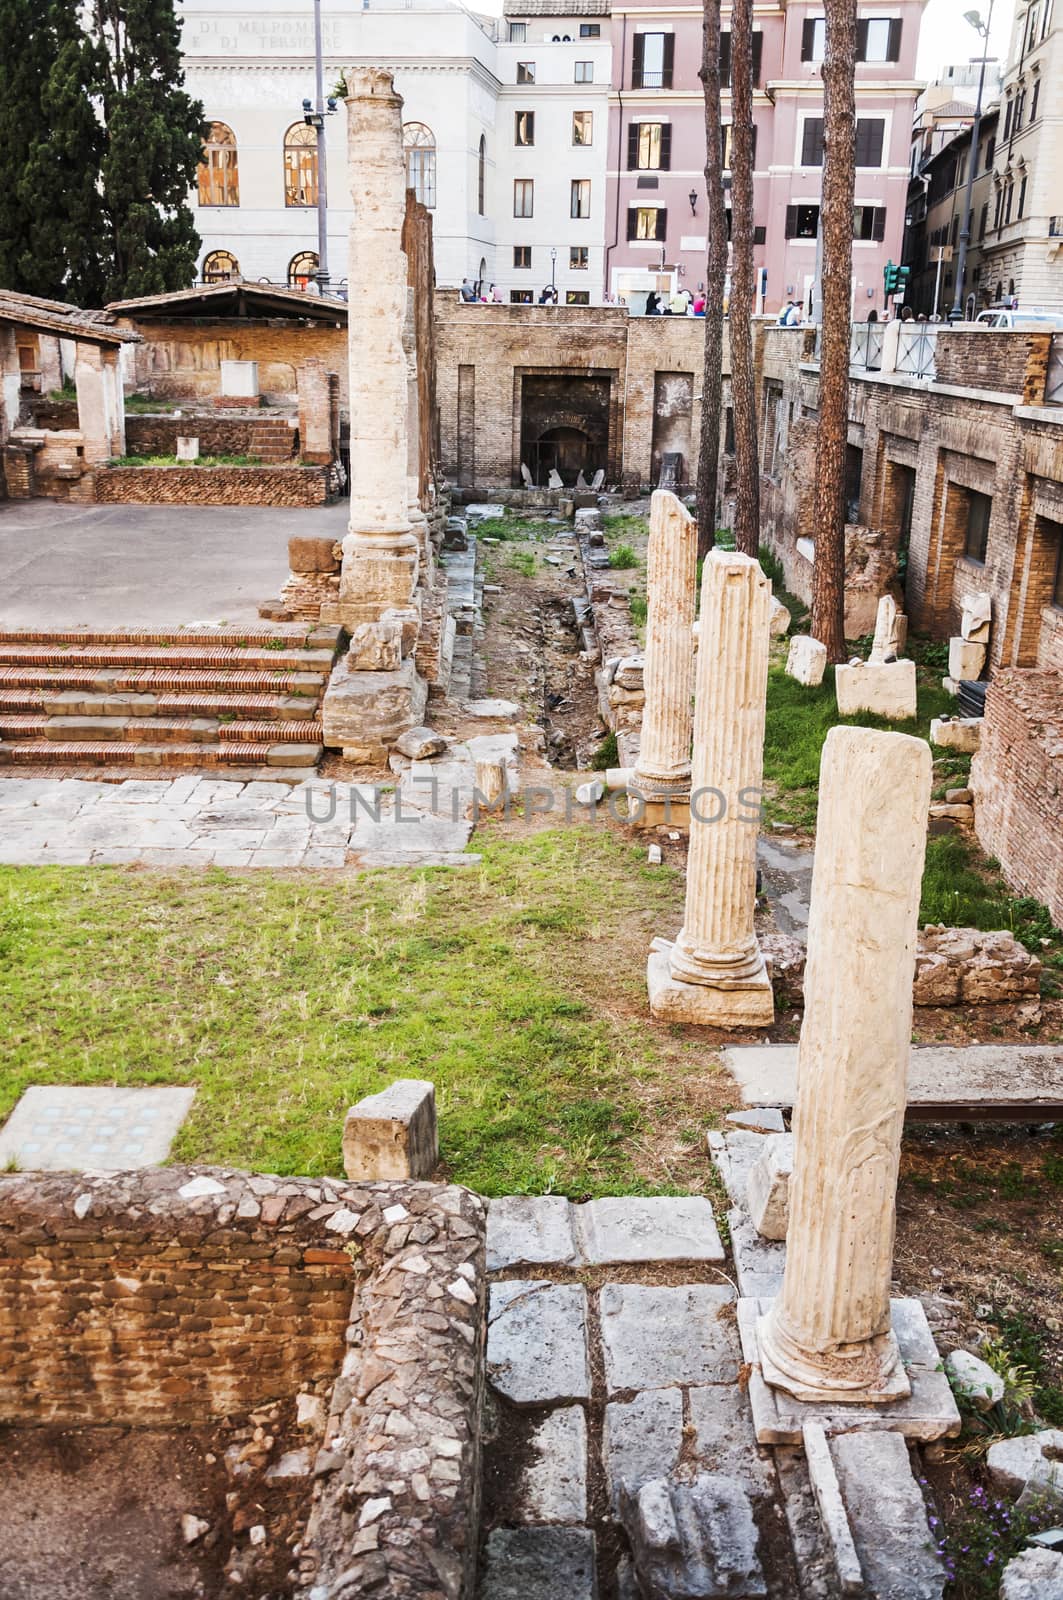 ROME - JUNE 01: roman temple ruins in the so-called Area Sacra on June 01, 2014 in Rome. Italy